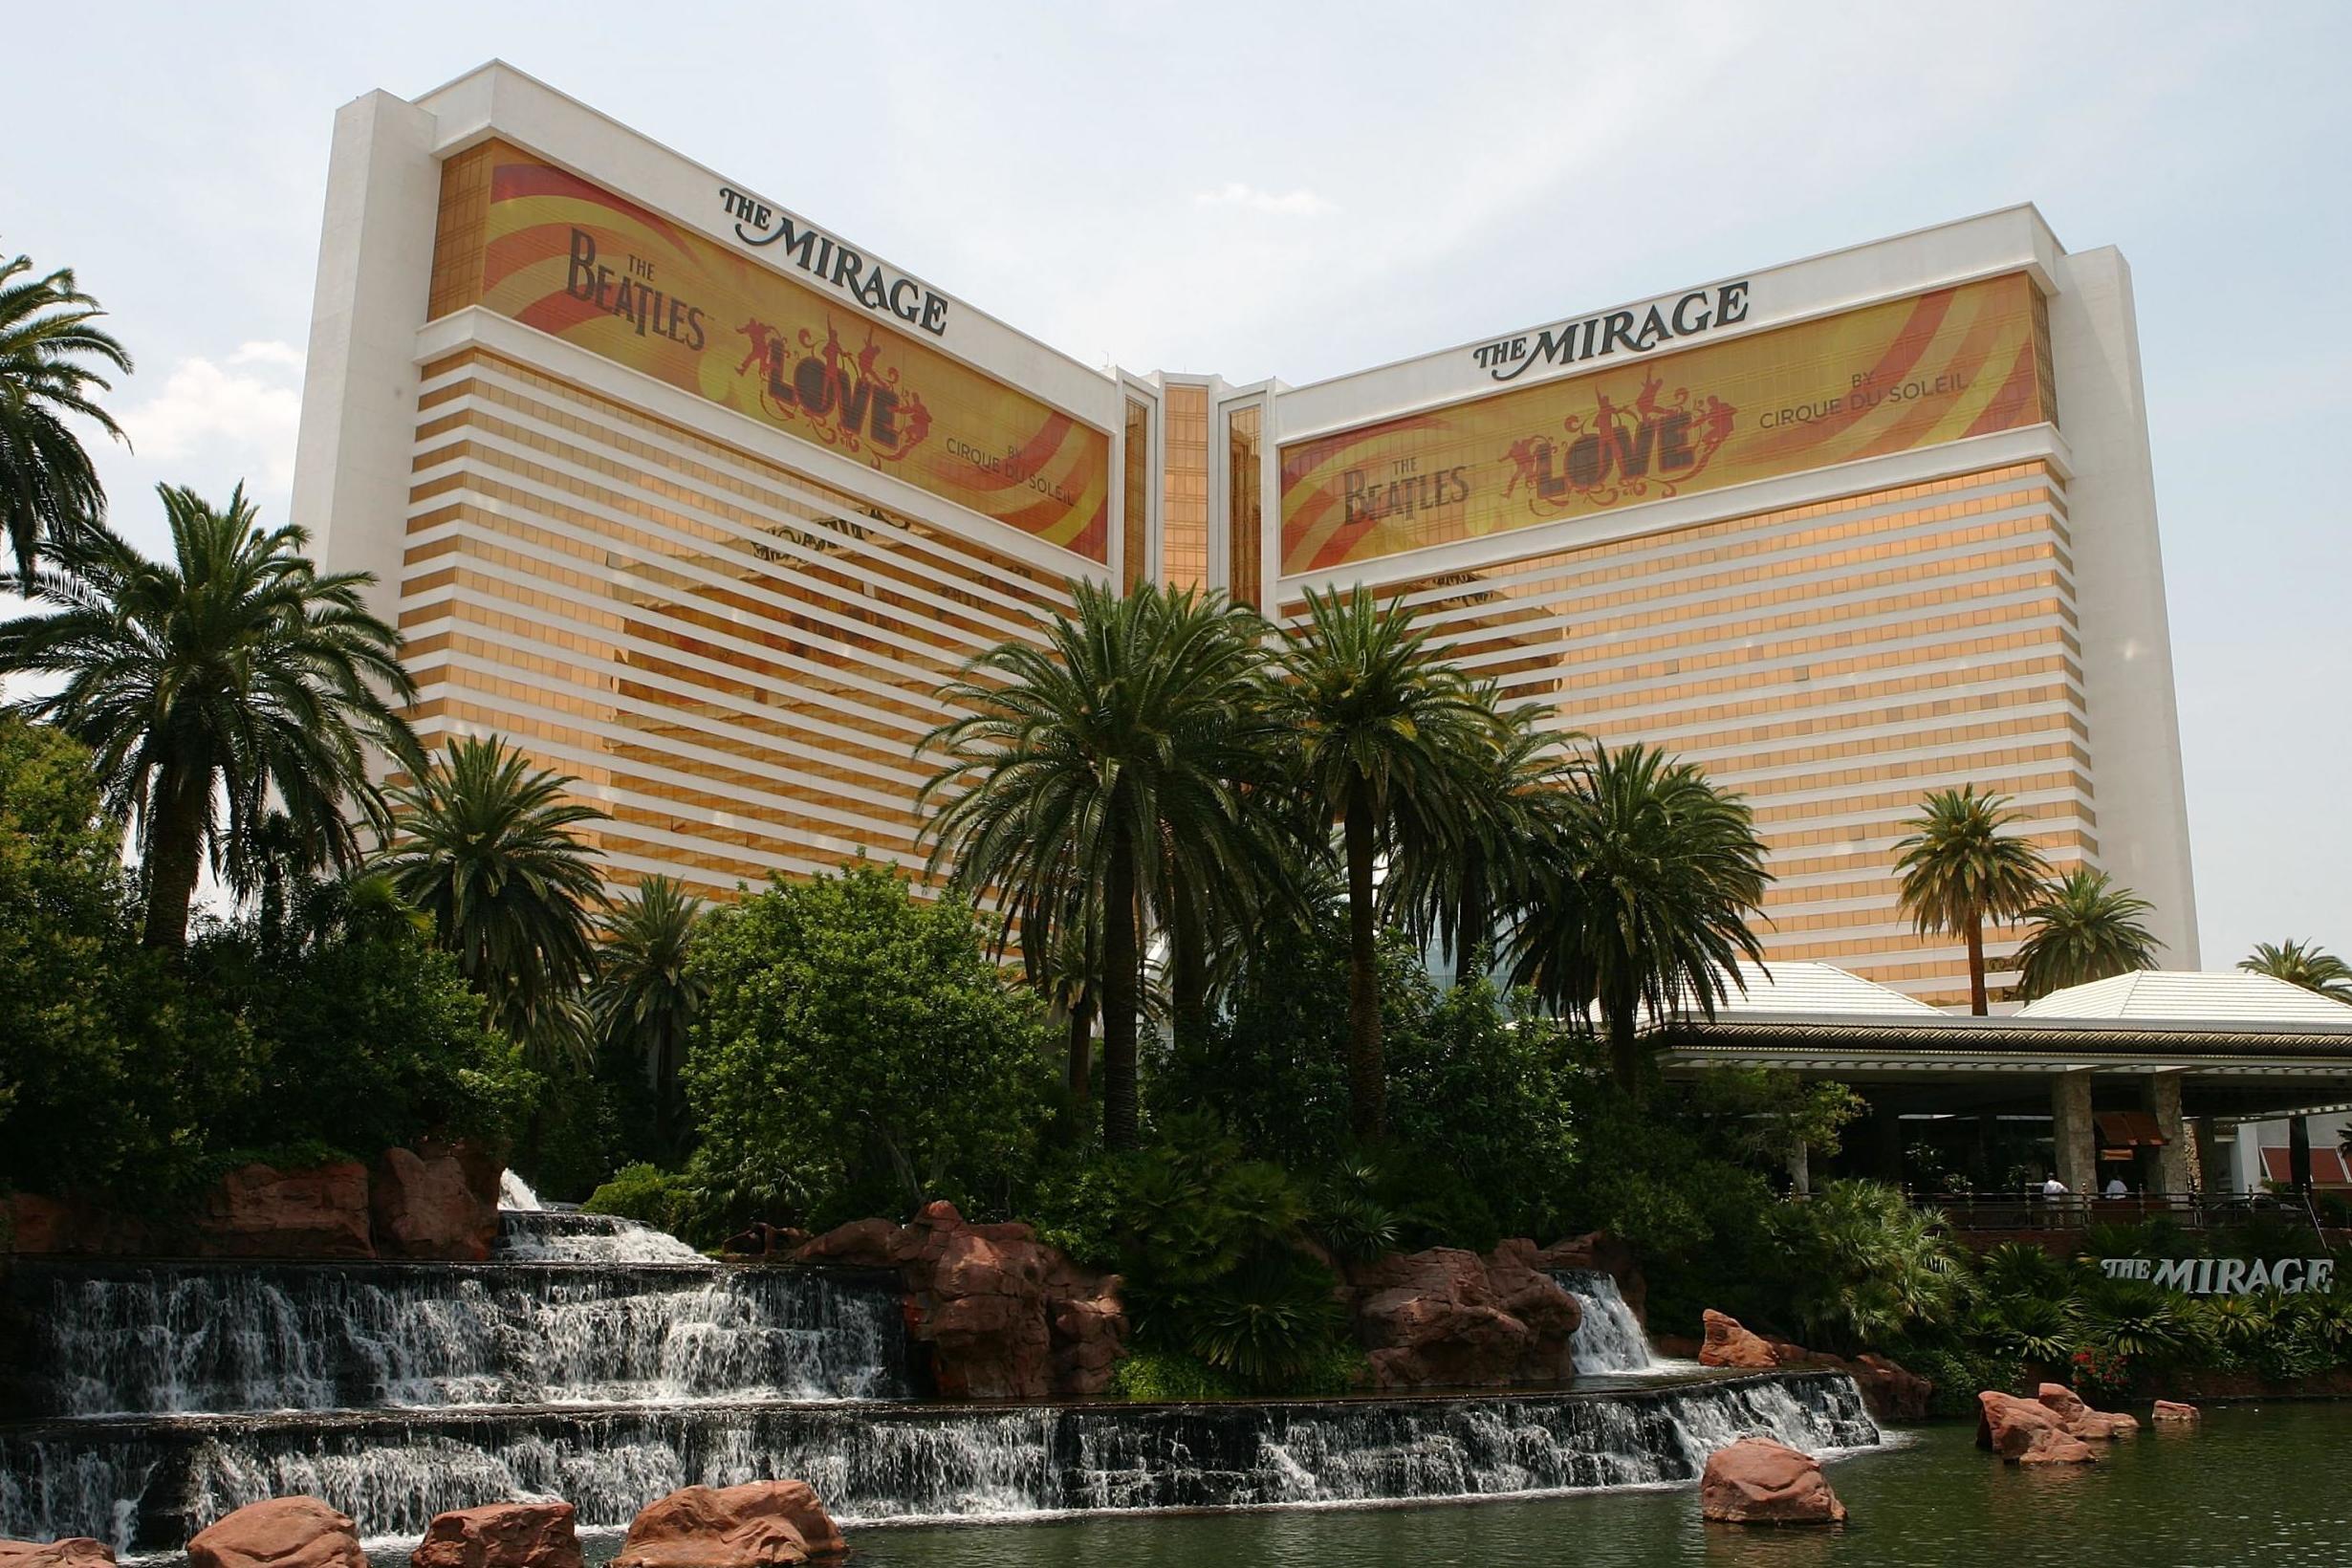 The Mirage hotel and casino advertises The Beales LOVE show in 2006 in Las Vegas.